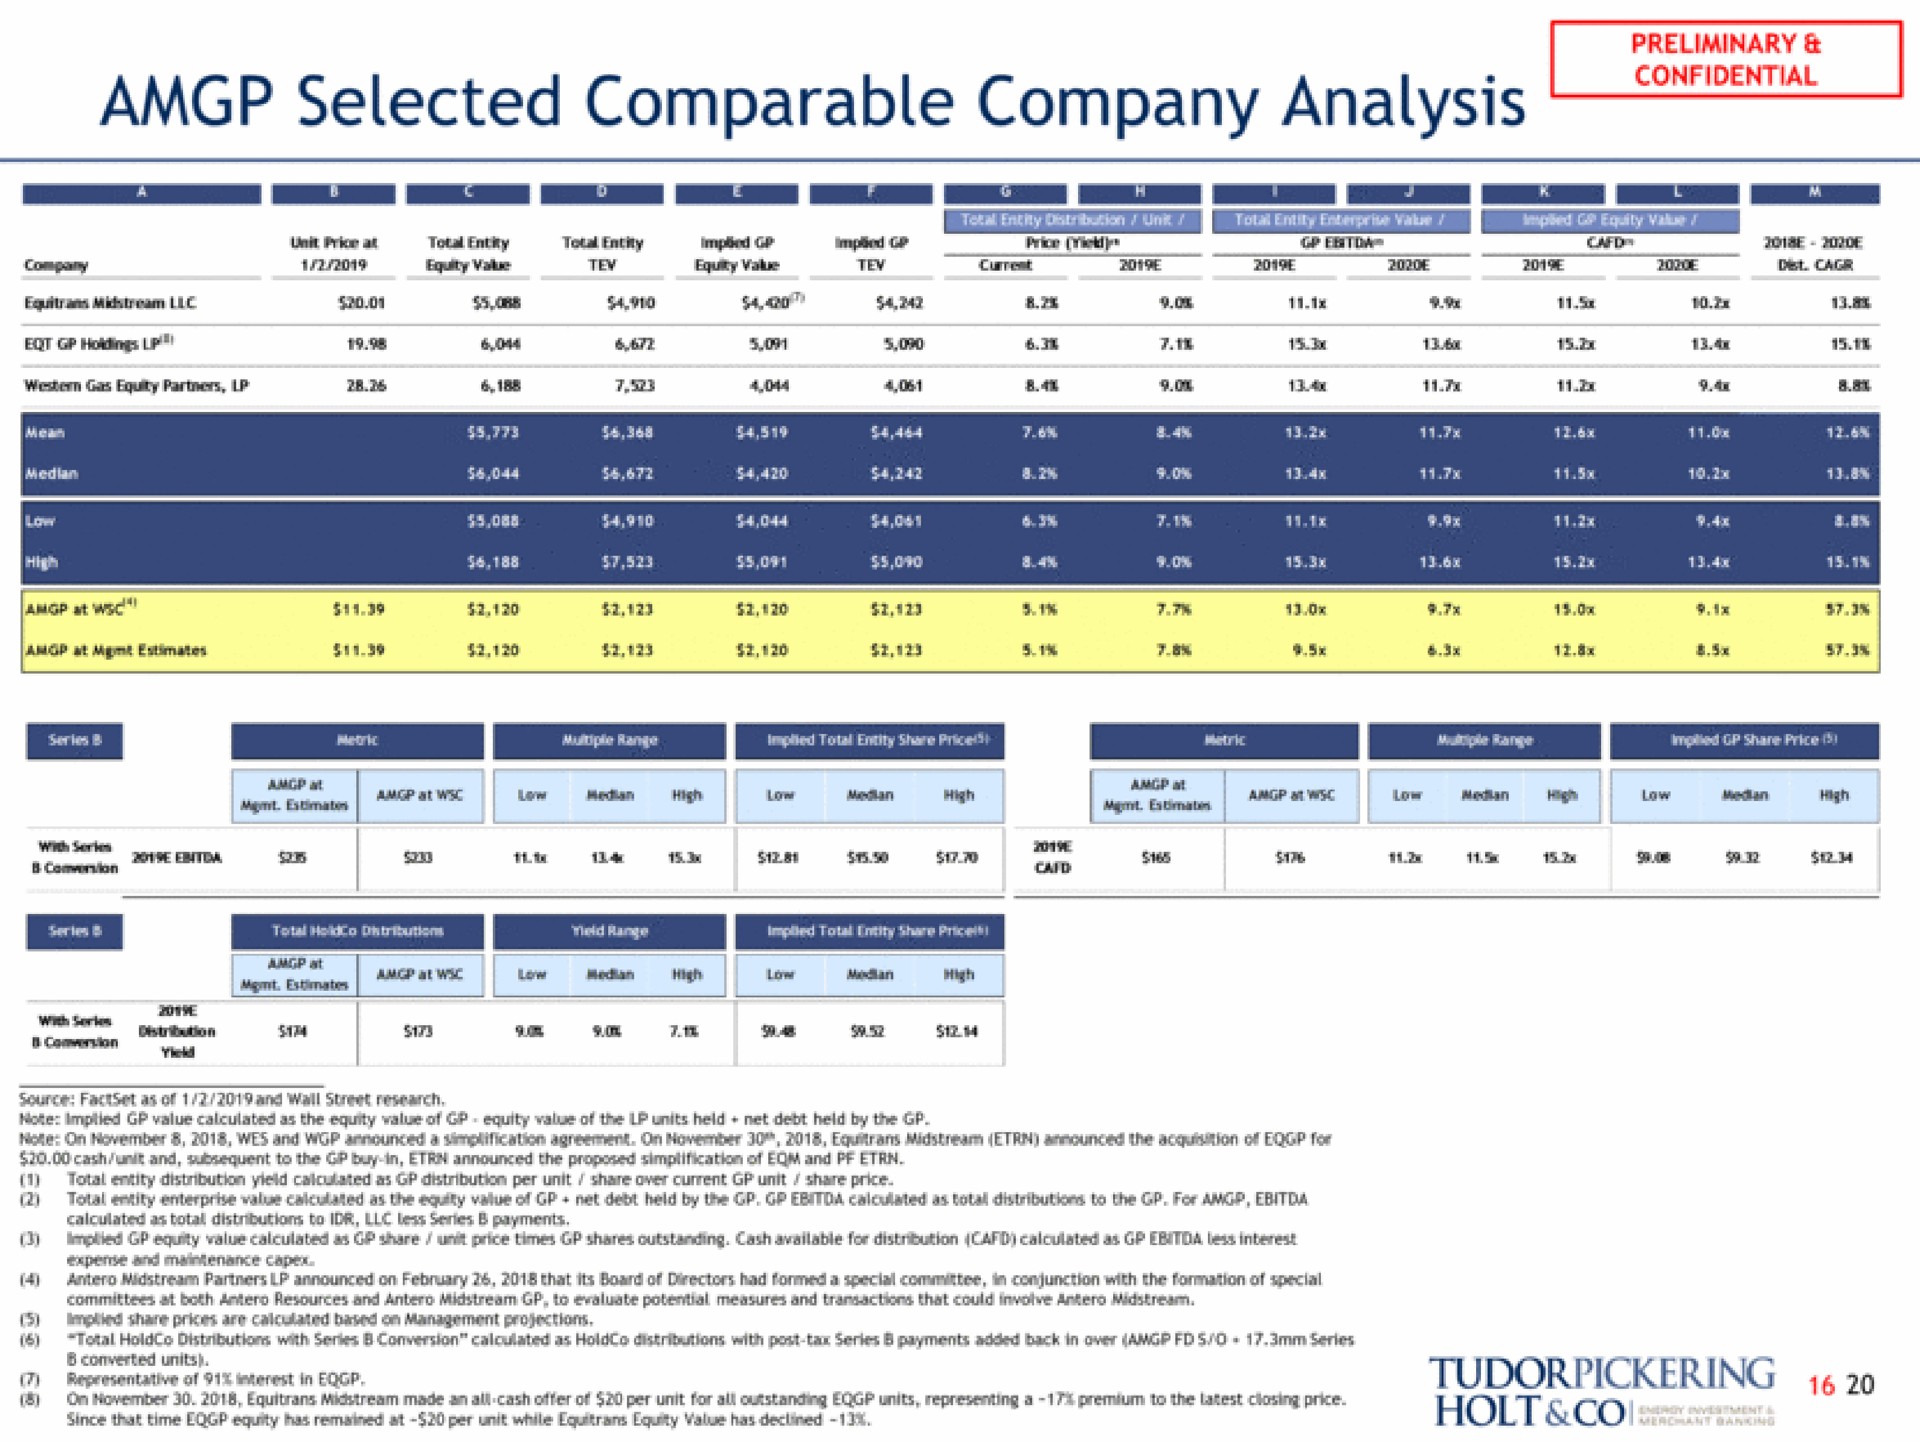 selected comparable company analysis holt | Tudor, Pickering, Holt & Co